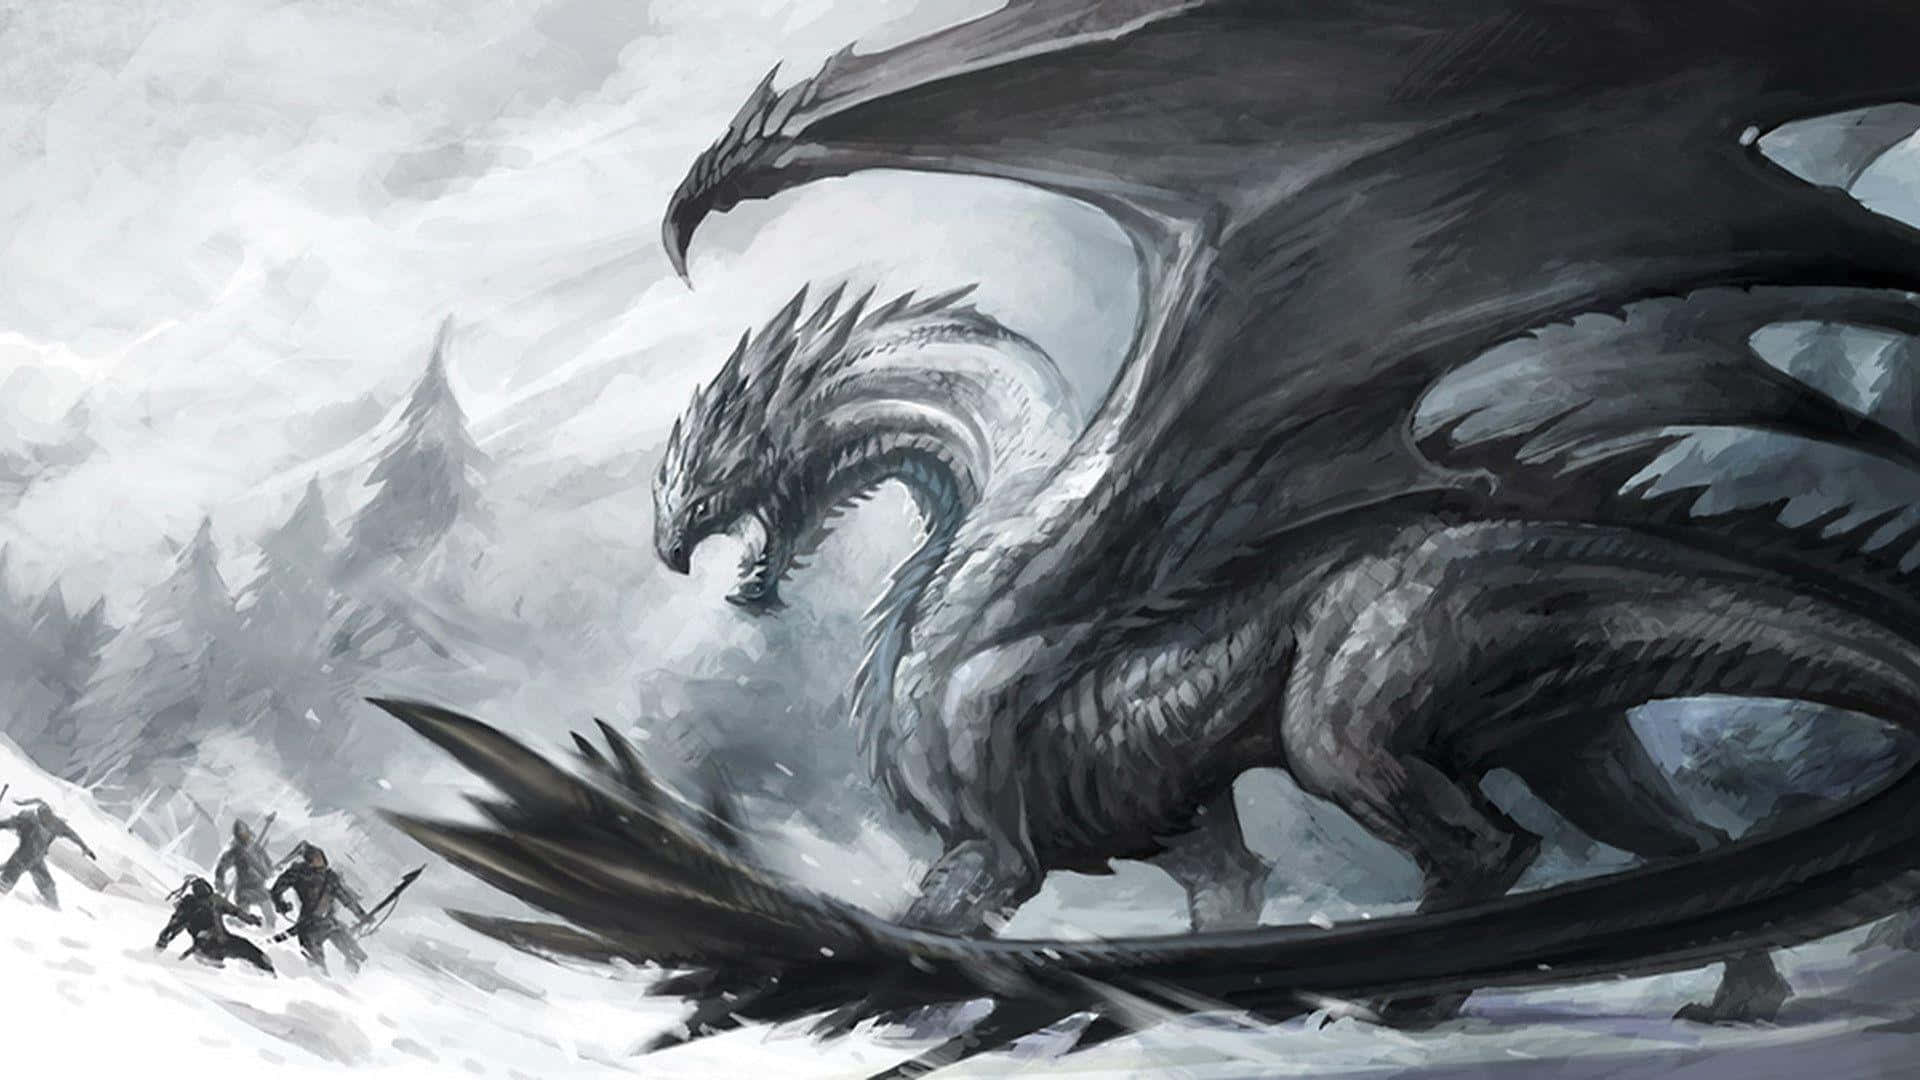 A Majestic Black Dragon Flying Against a Dramatic Night Sky Wallpaper